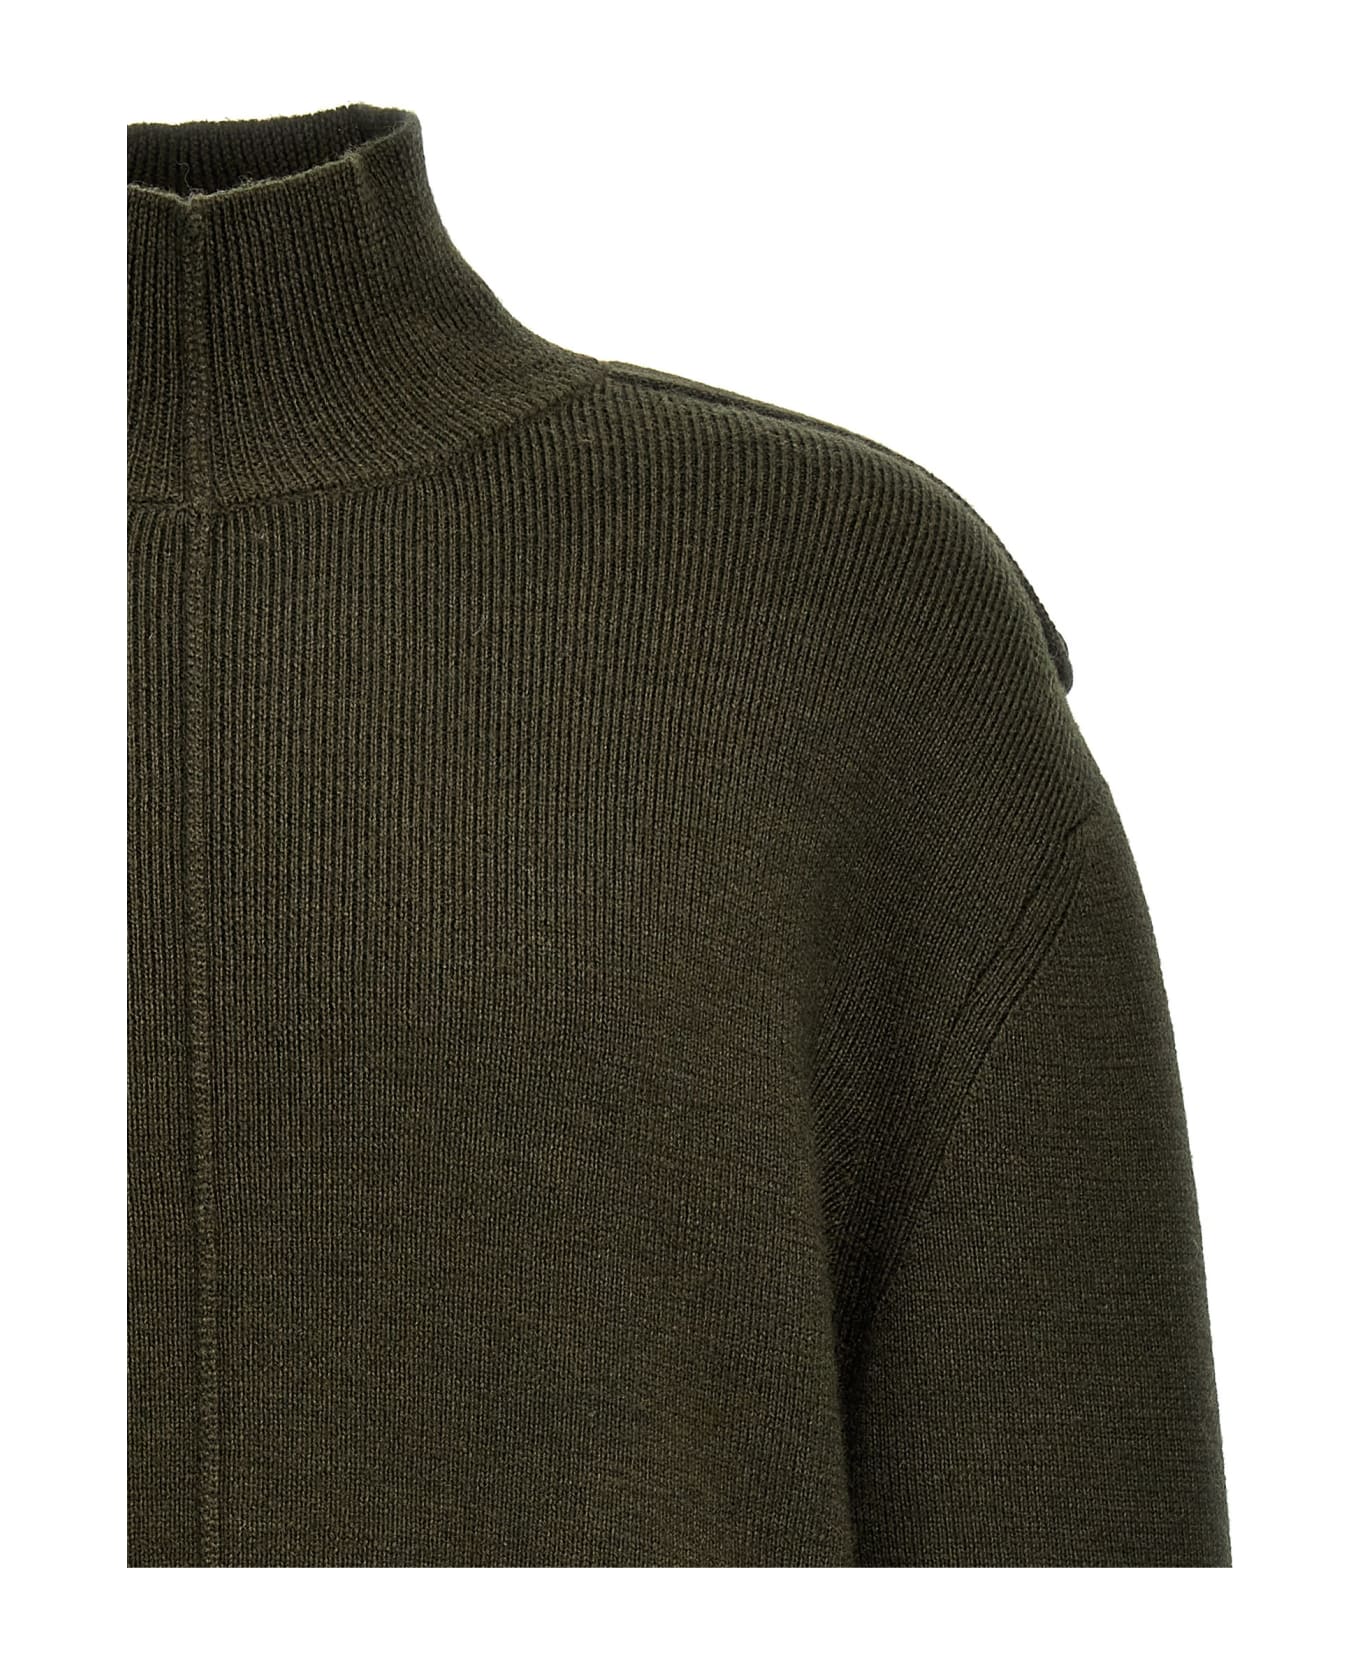 A-COLD-WALL 'utility' Sweater - Green